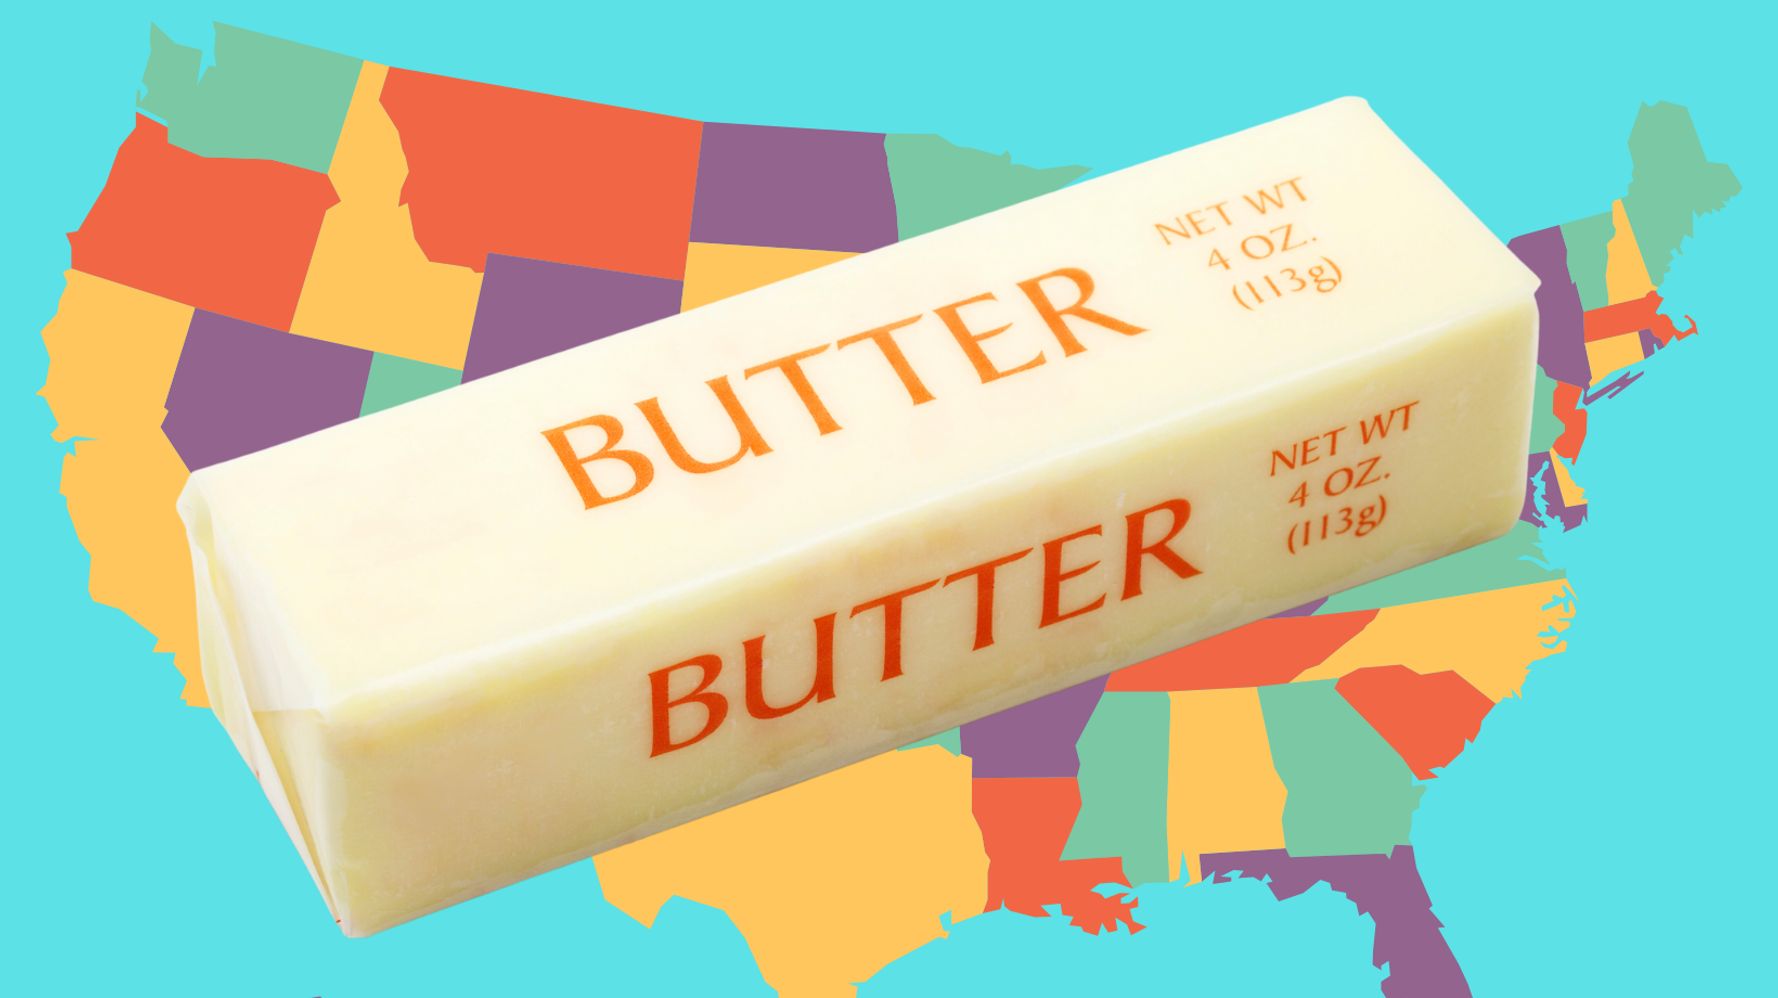 East And West Coast Butter Is Different, And We've All Been Living A Lie